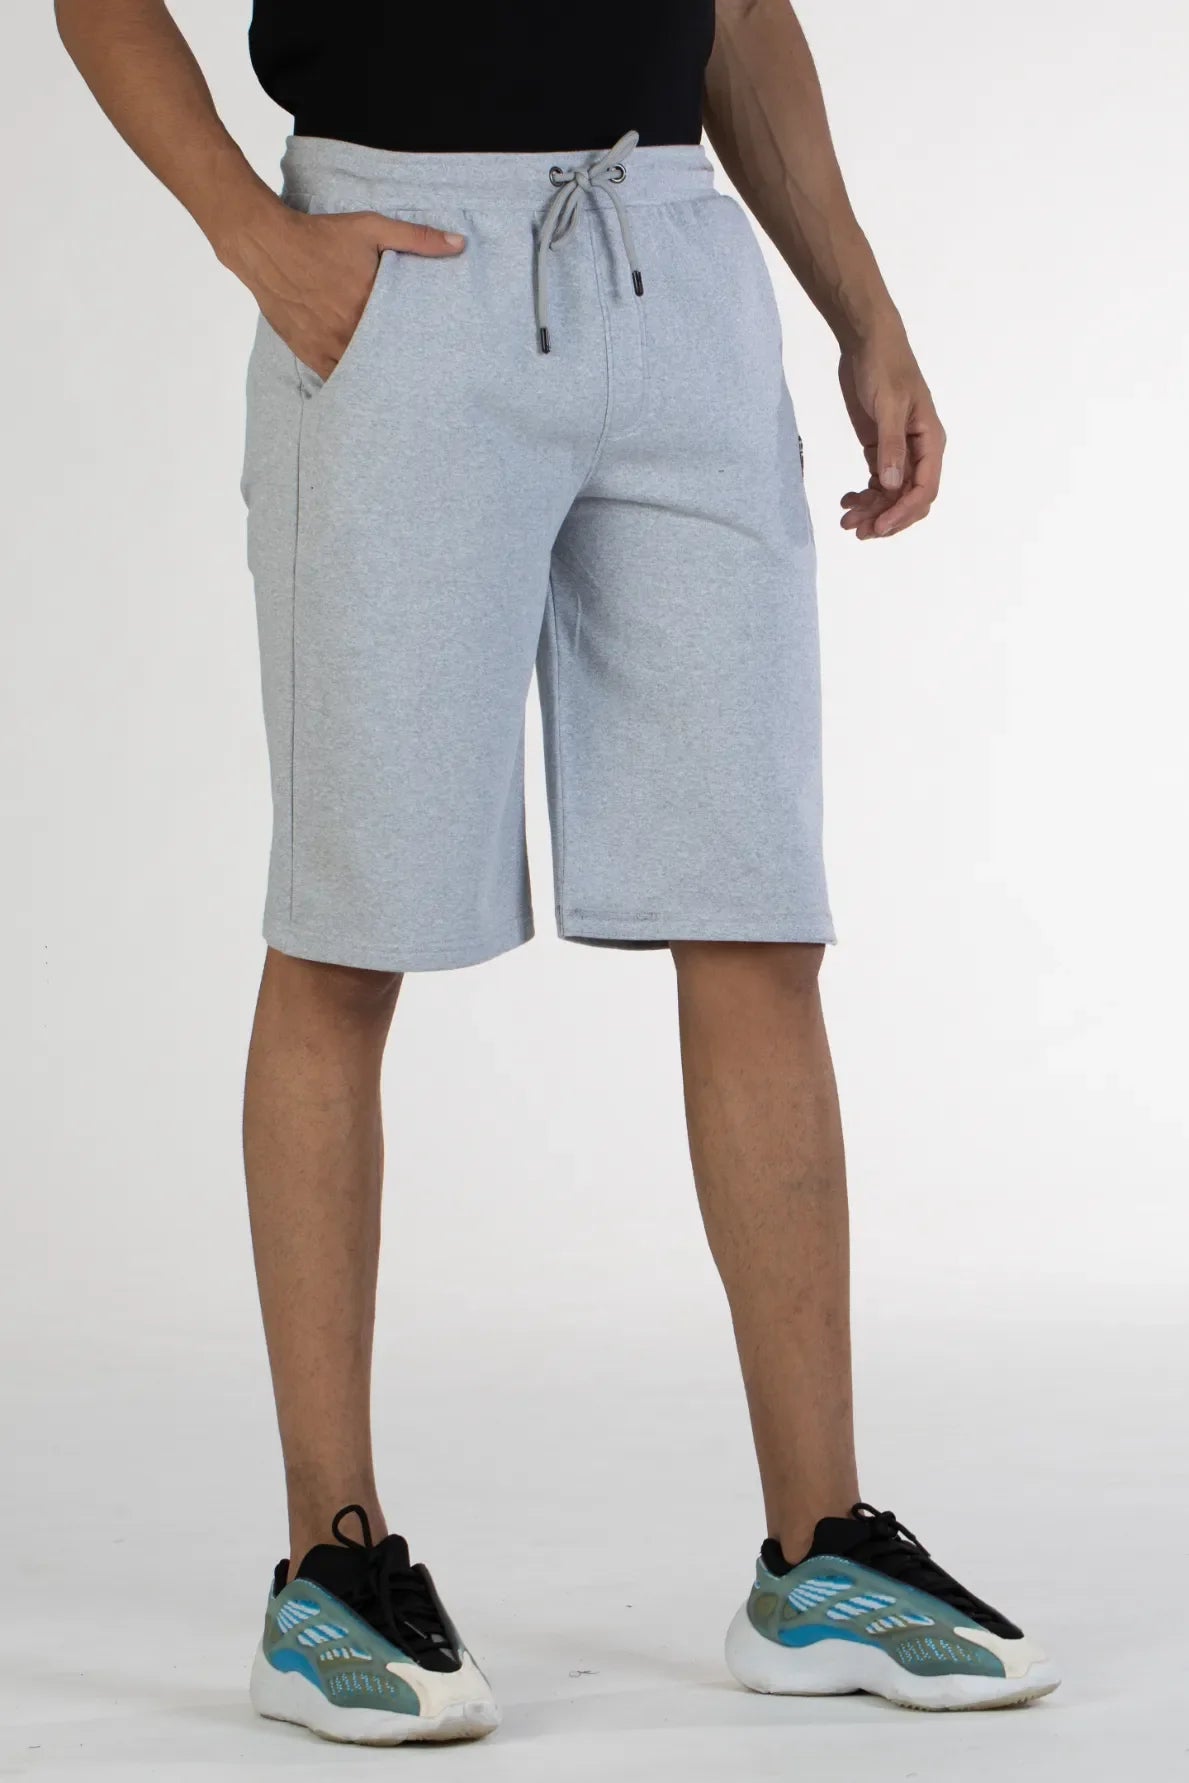 Buy Sloid Knit Cotton Shorts Online.